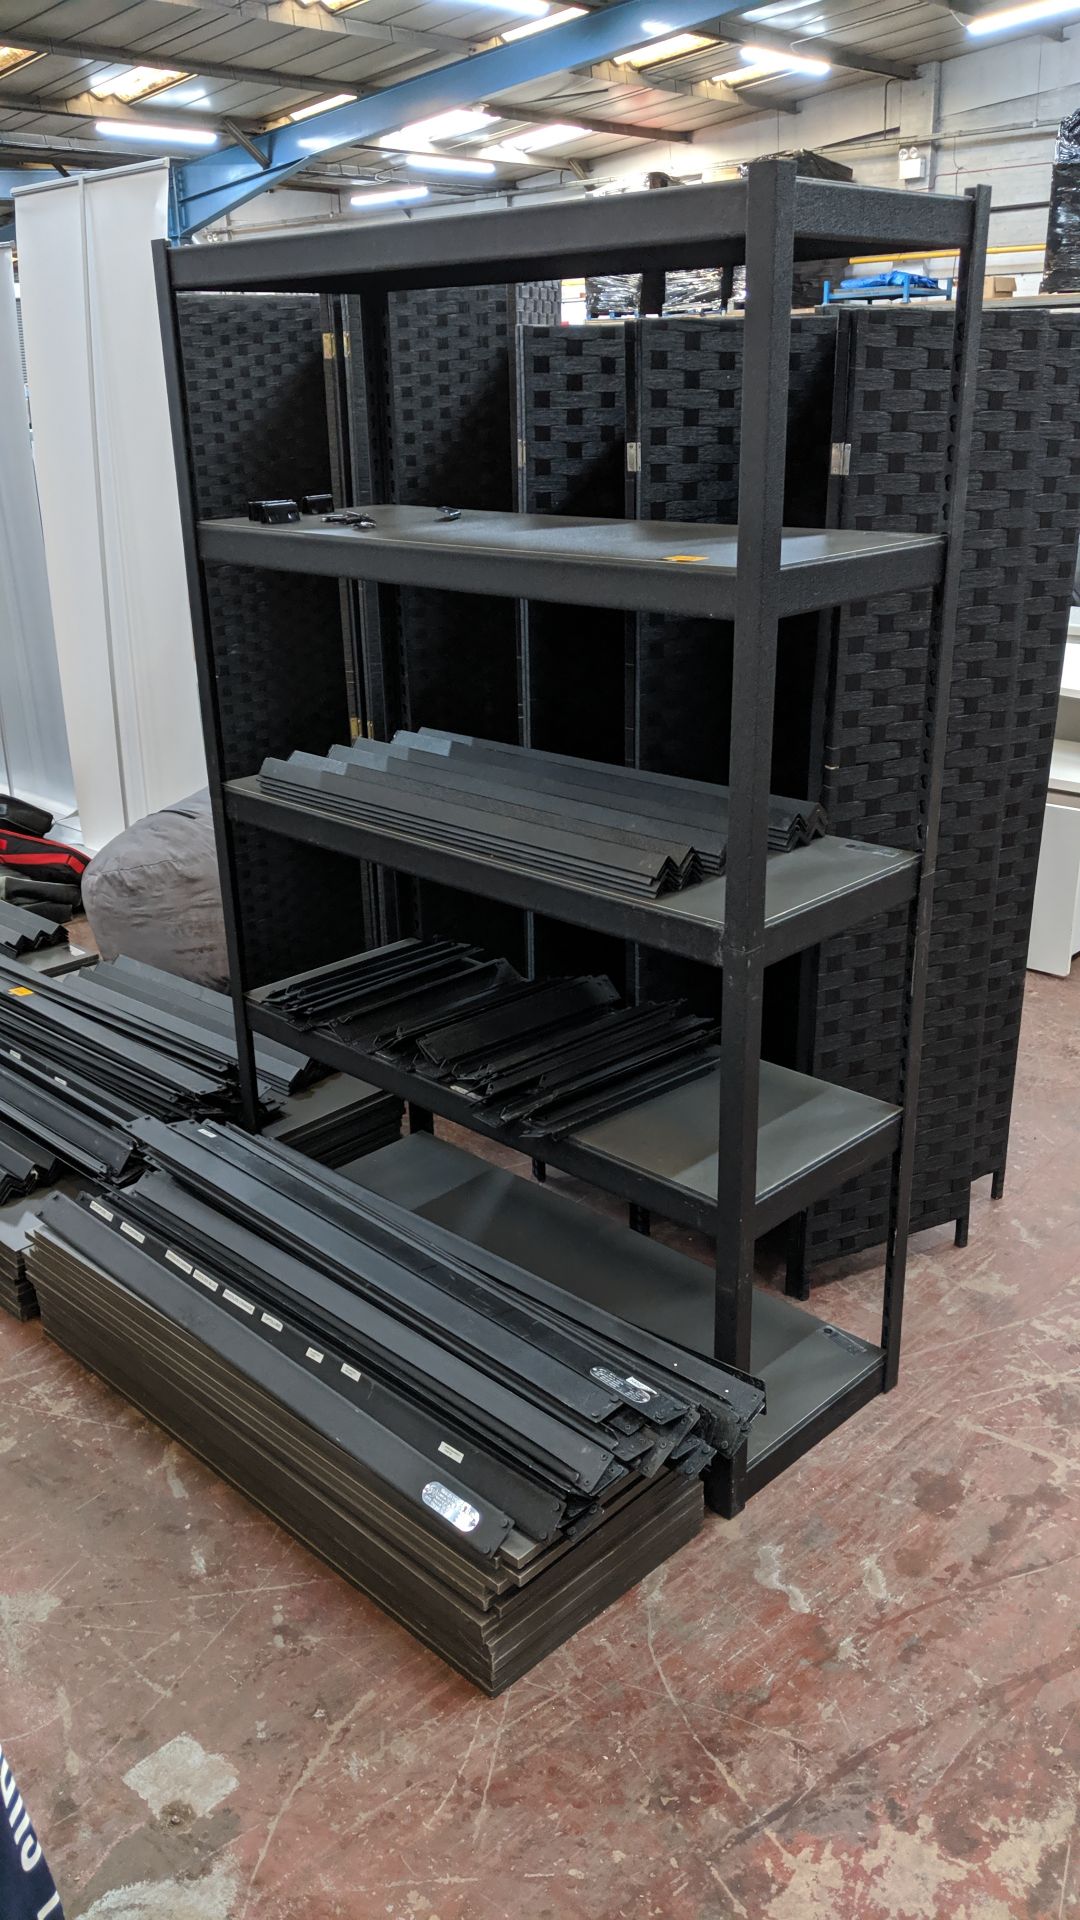 4 off bays of freestanding Whalen bolt-free racking comprising uprights, shelves & beams. This is